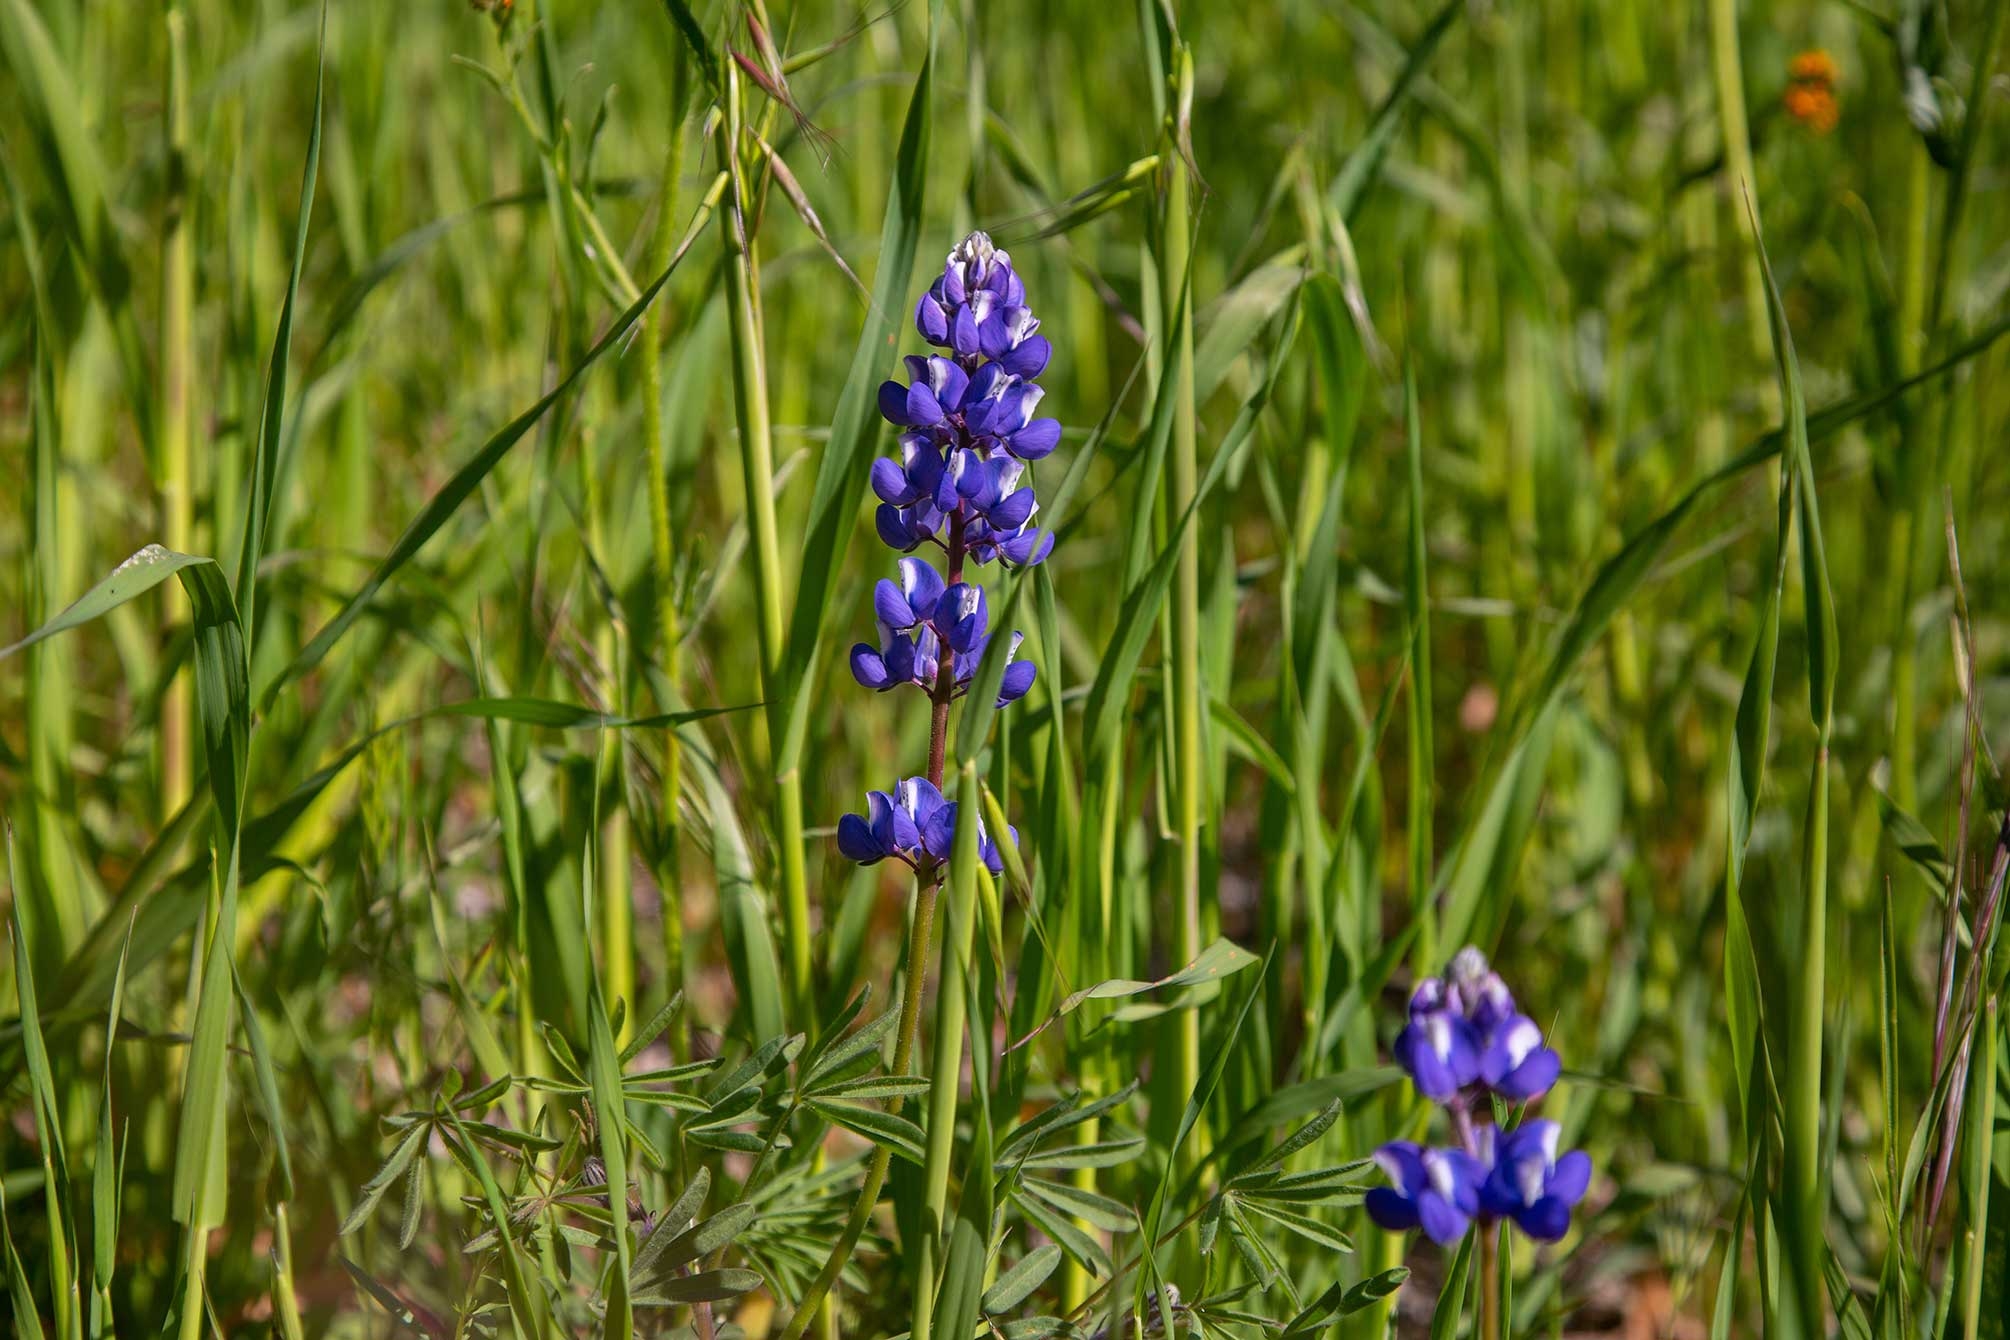 Lupines among the tall grass.